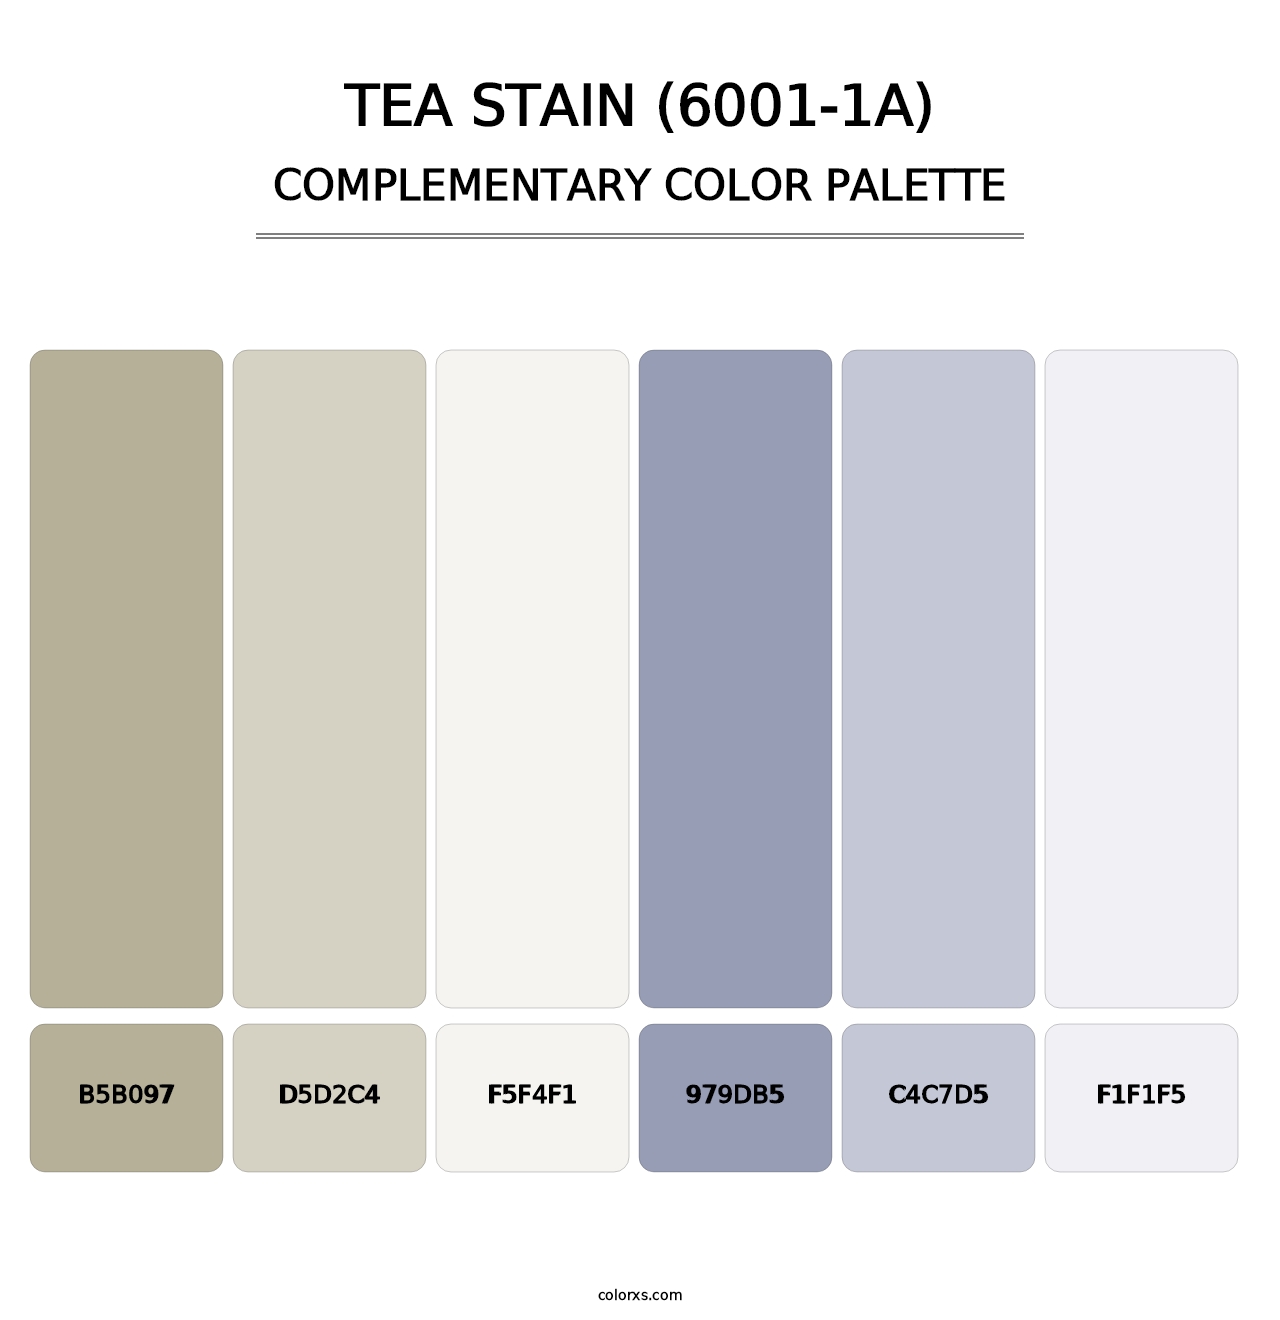 Tea Stain (6001-1A) - Complementary Color Palette